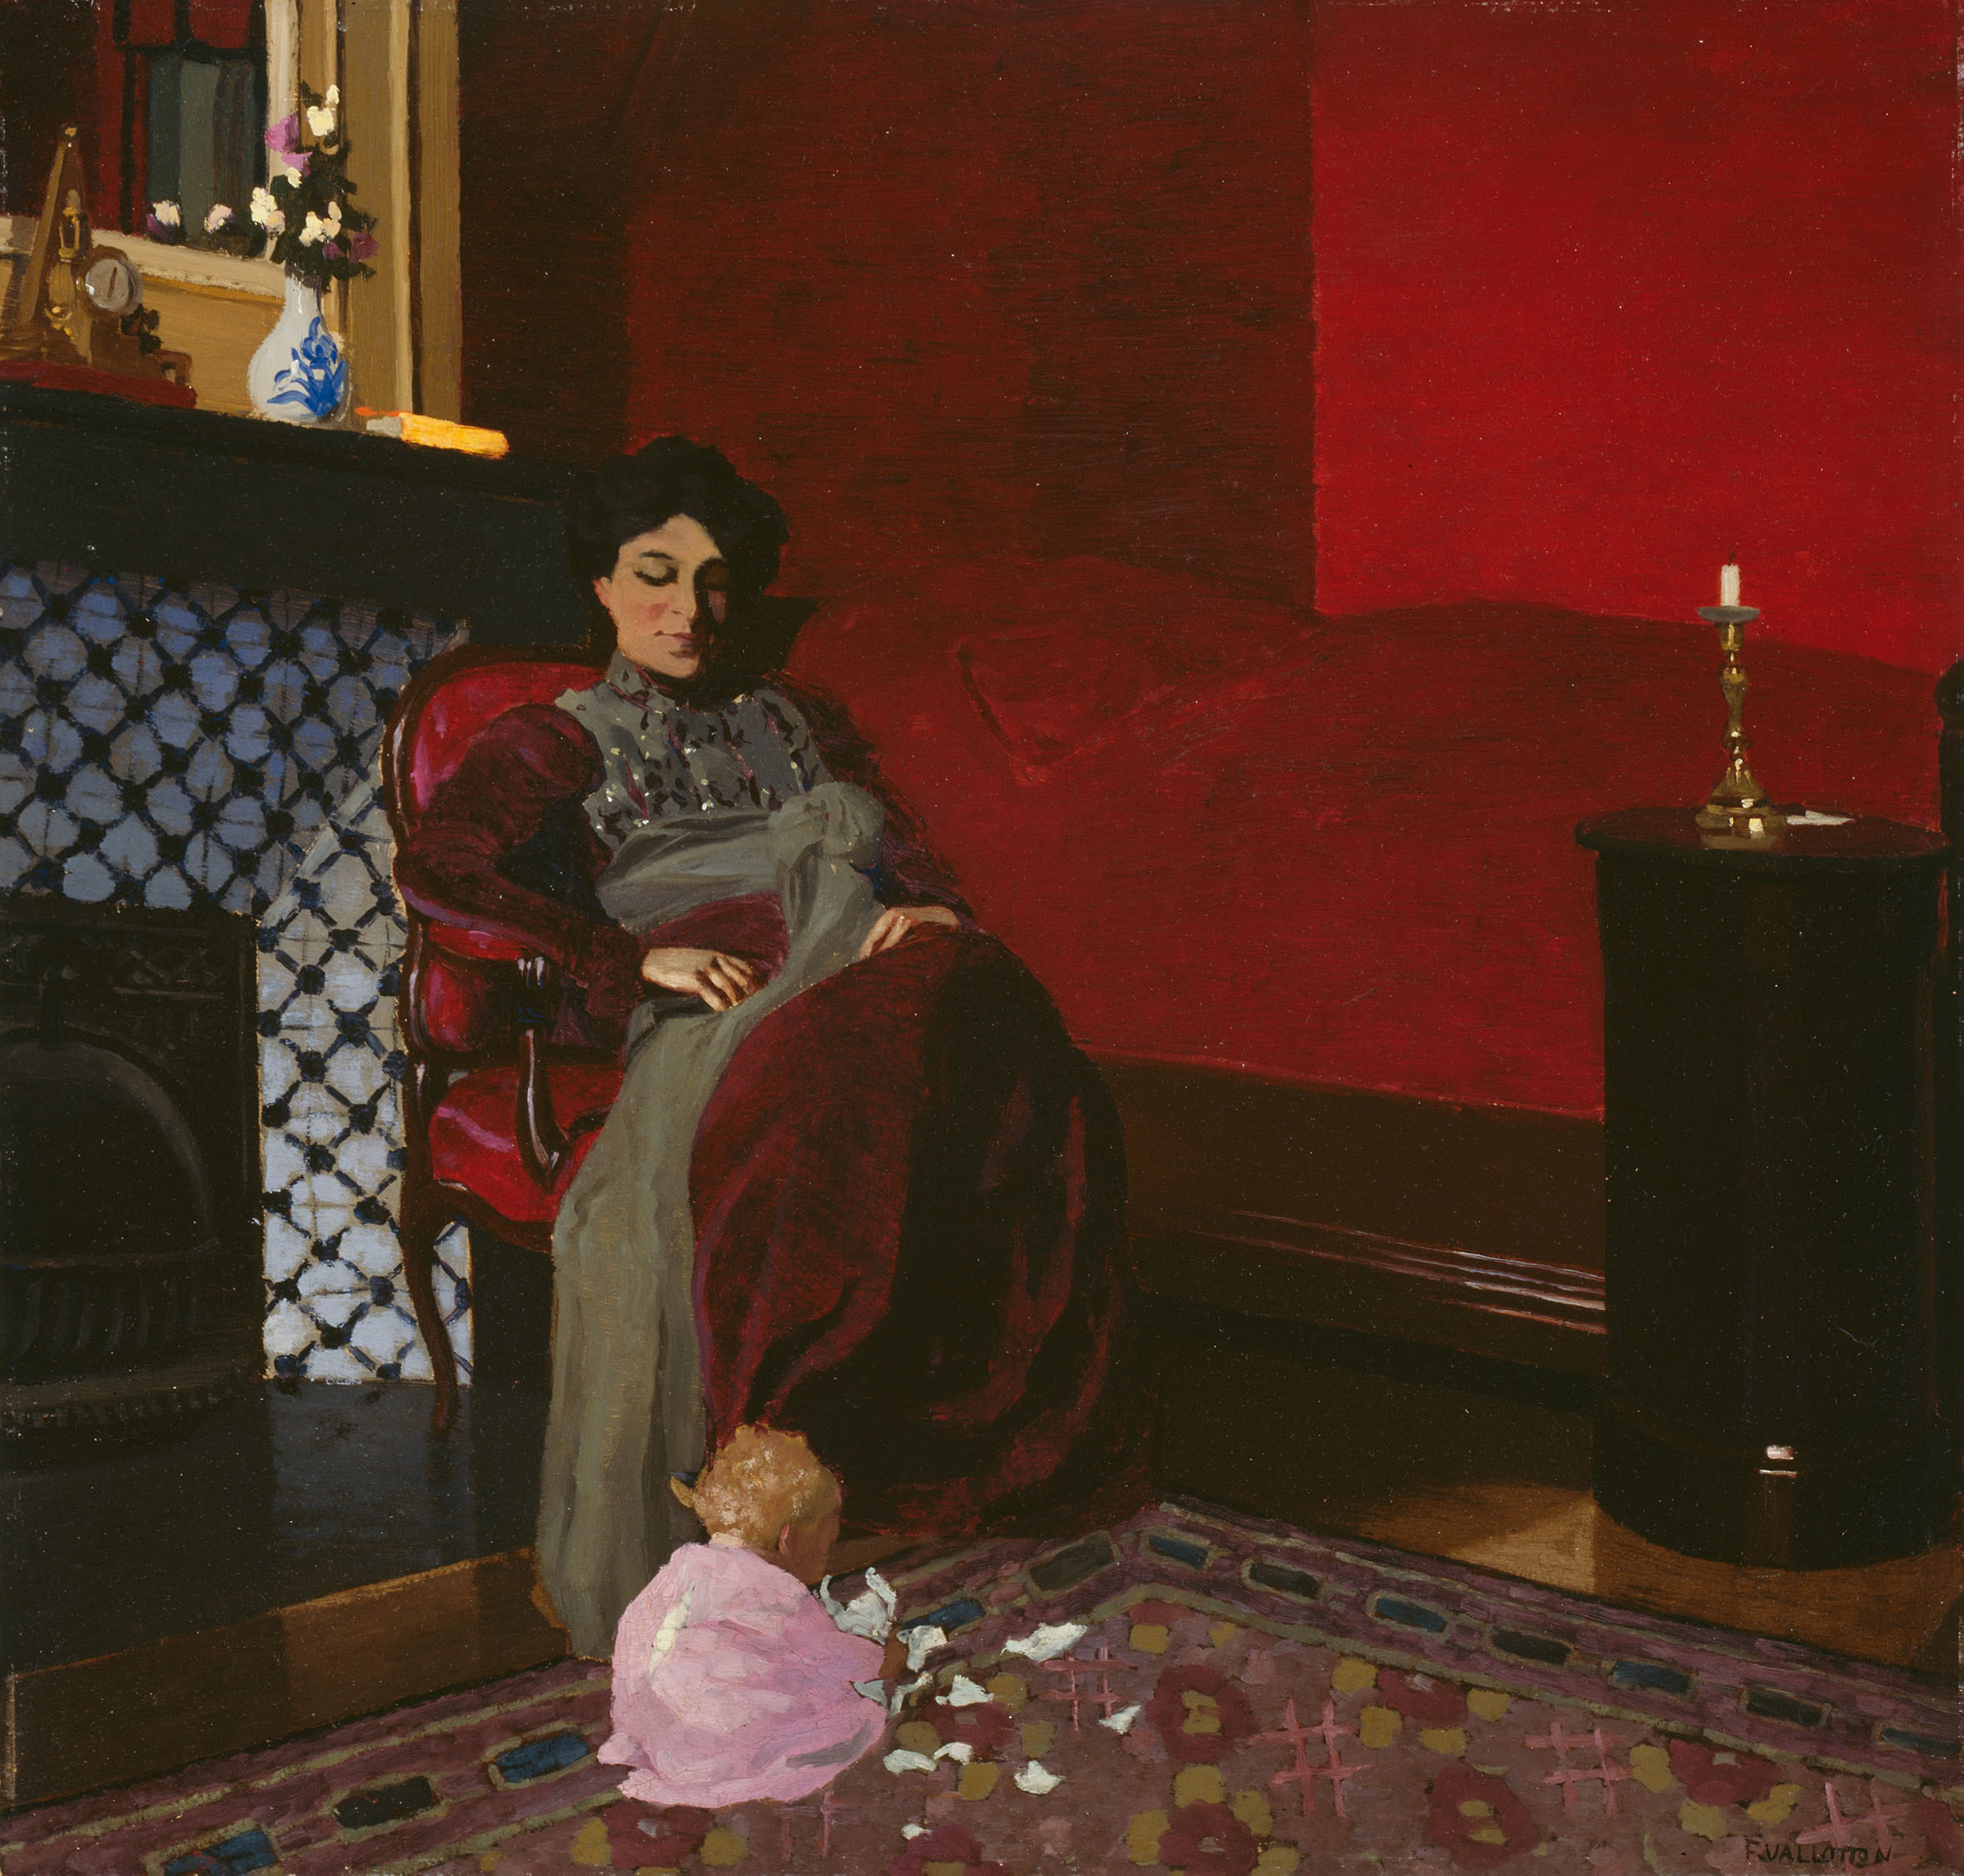 "The Red Room, Étretat," 1899 by Félix Vallotton will be on view in the Cleveland Museum of Art's upcoming show on the Nabis school of French painters. The Art Institute of Chicago, Bequest of Mrs. Clive Runnells, 1977.606